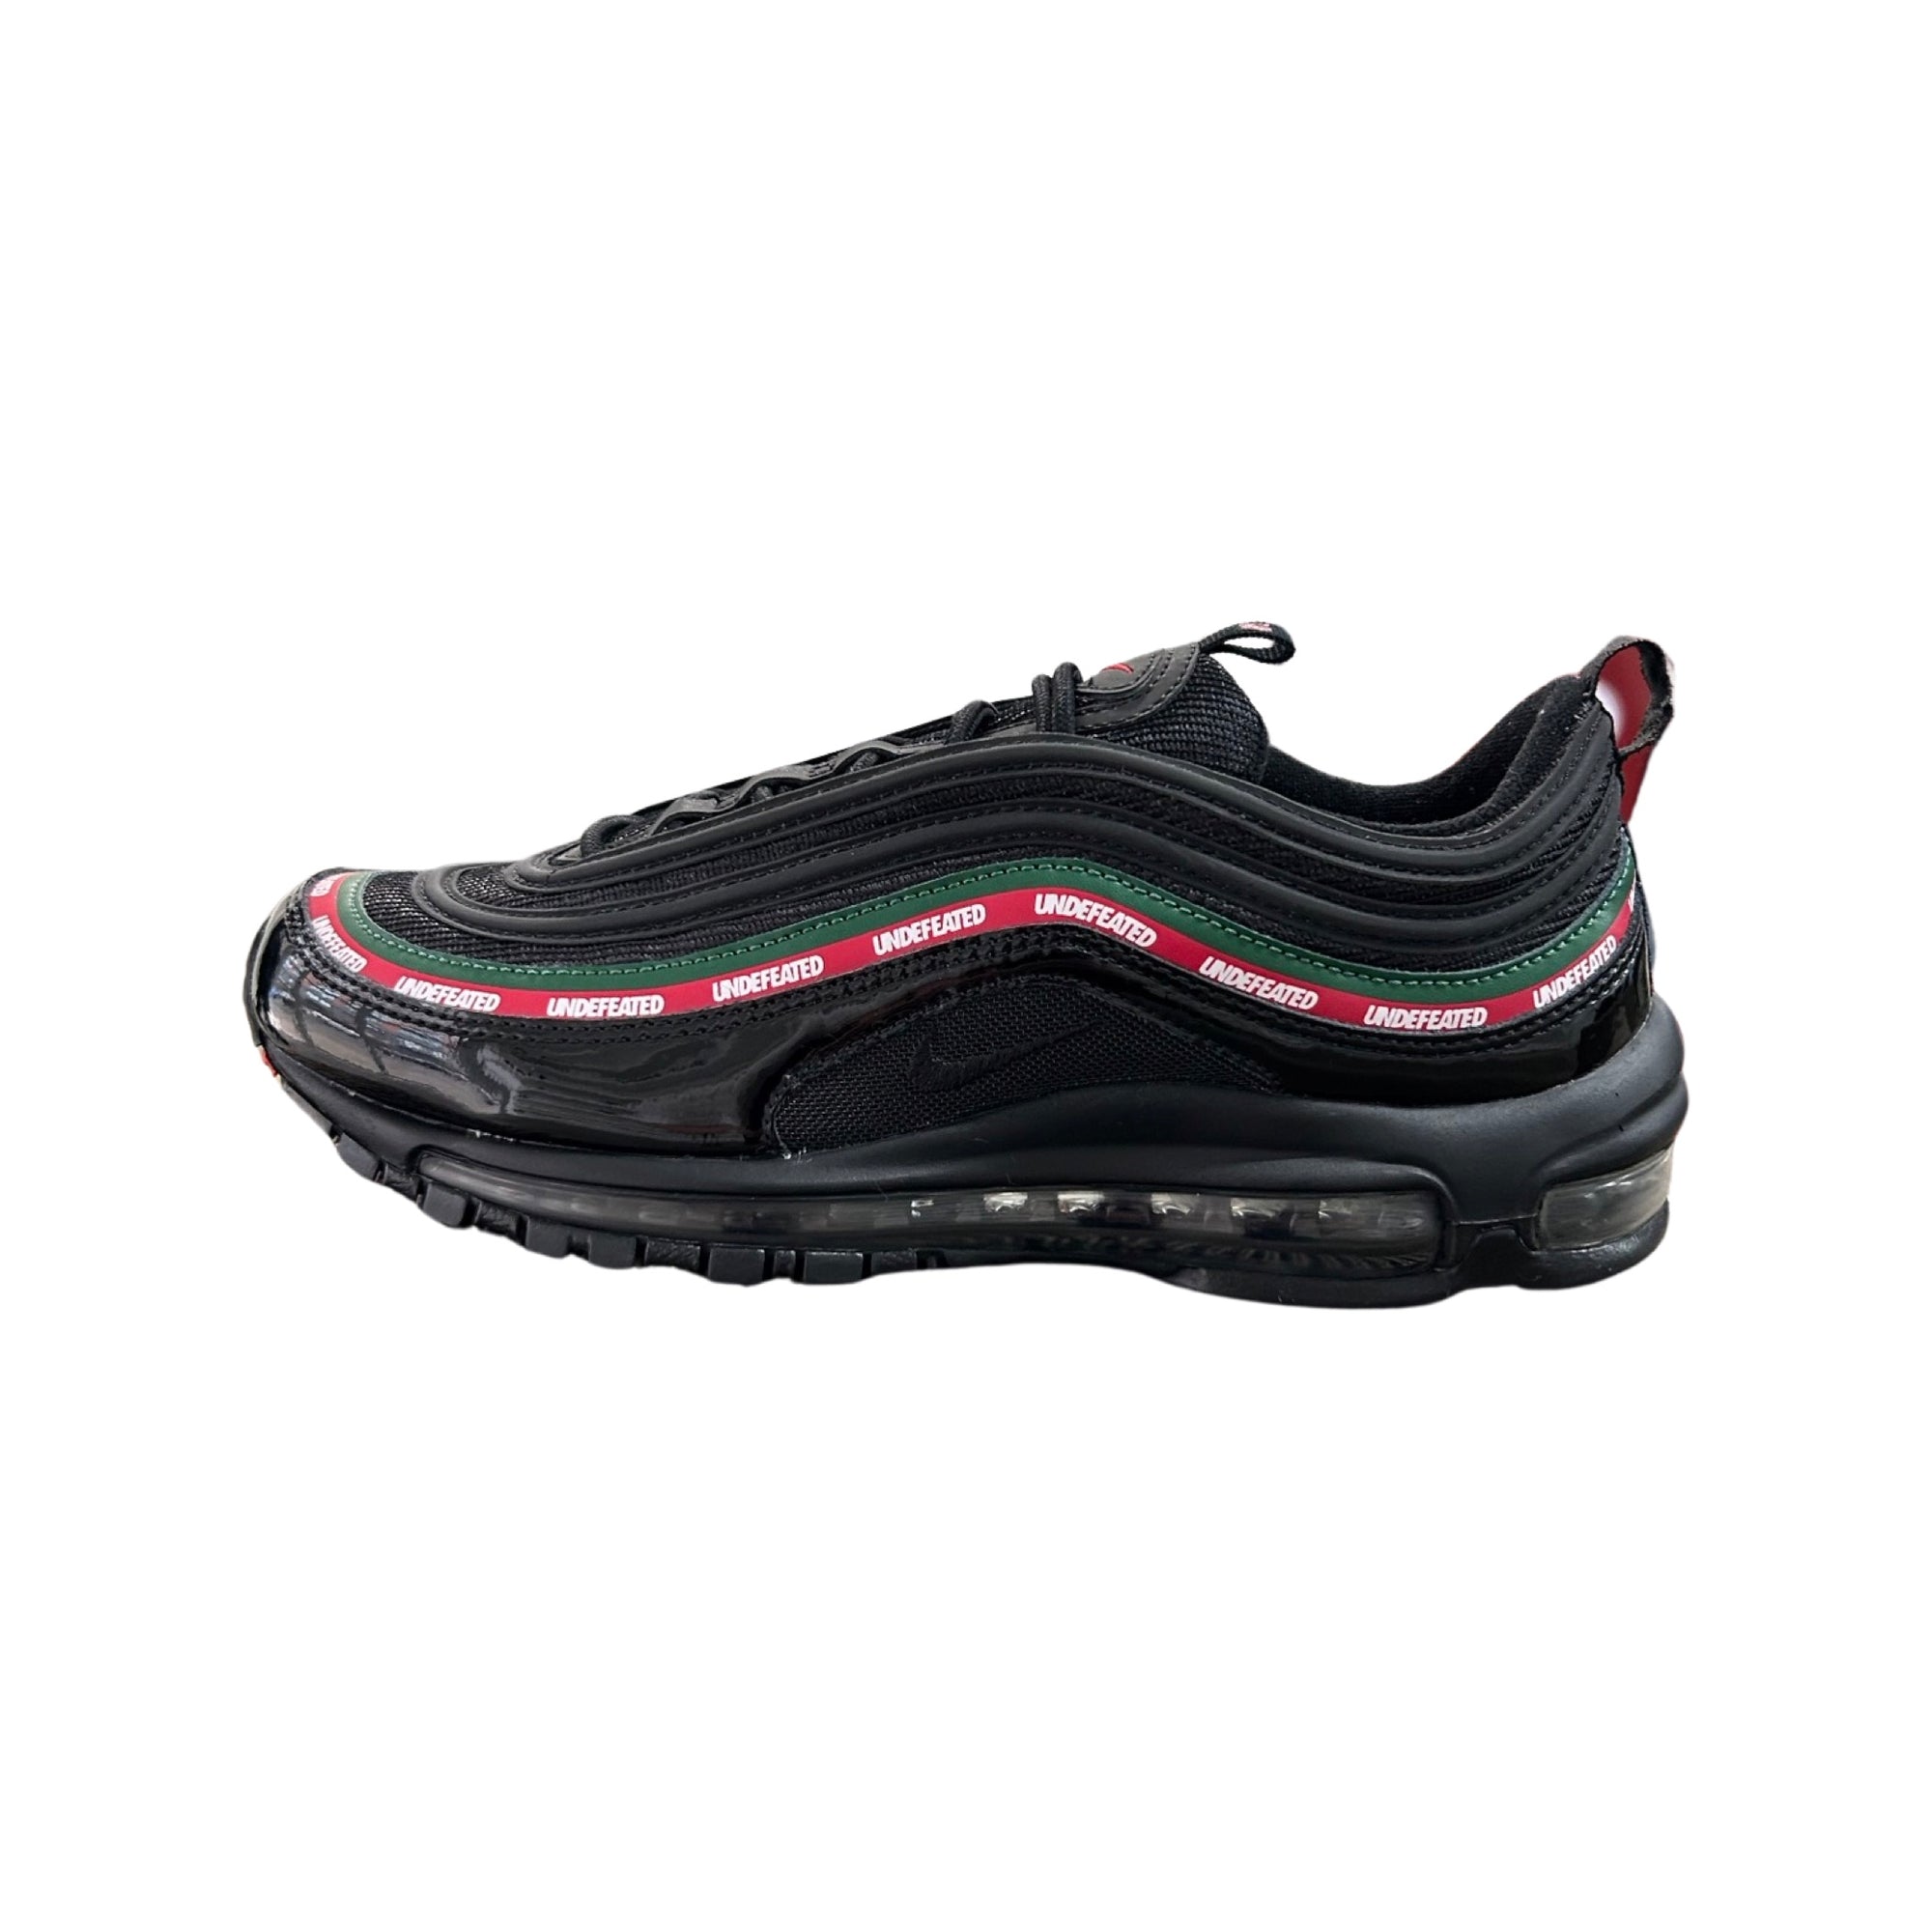 NIKE X UNDEFEATED AIR MAX 97 “BLACK”